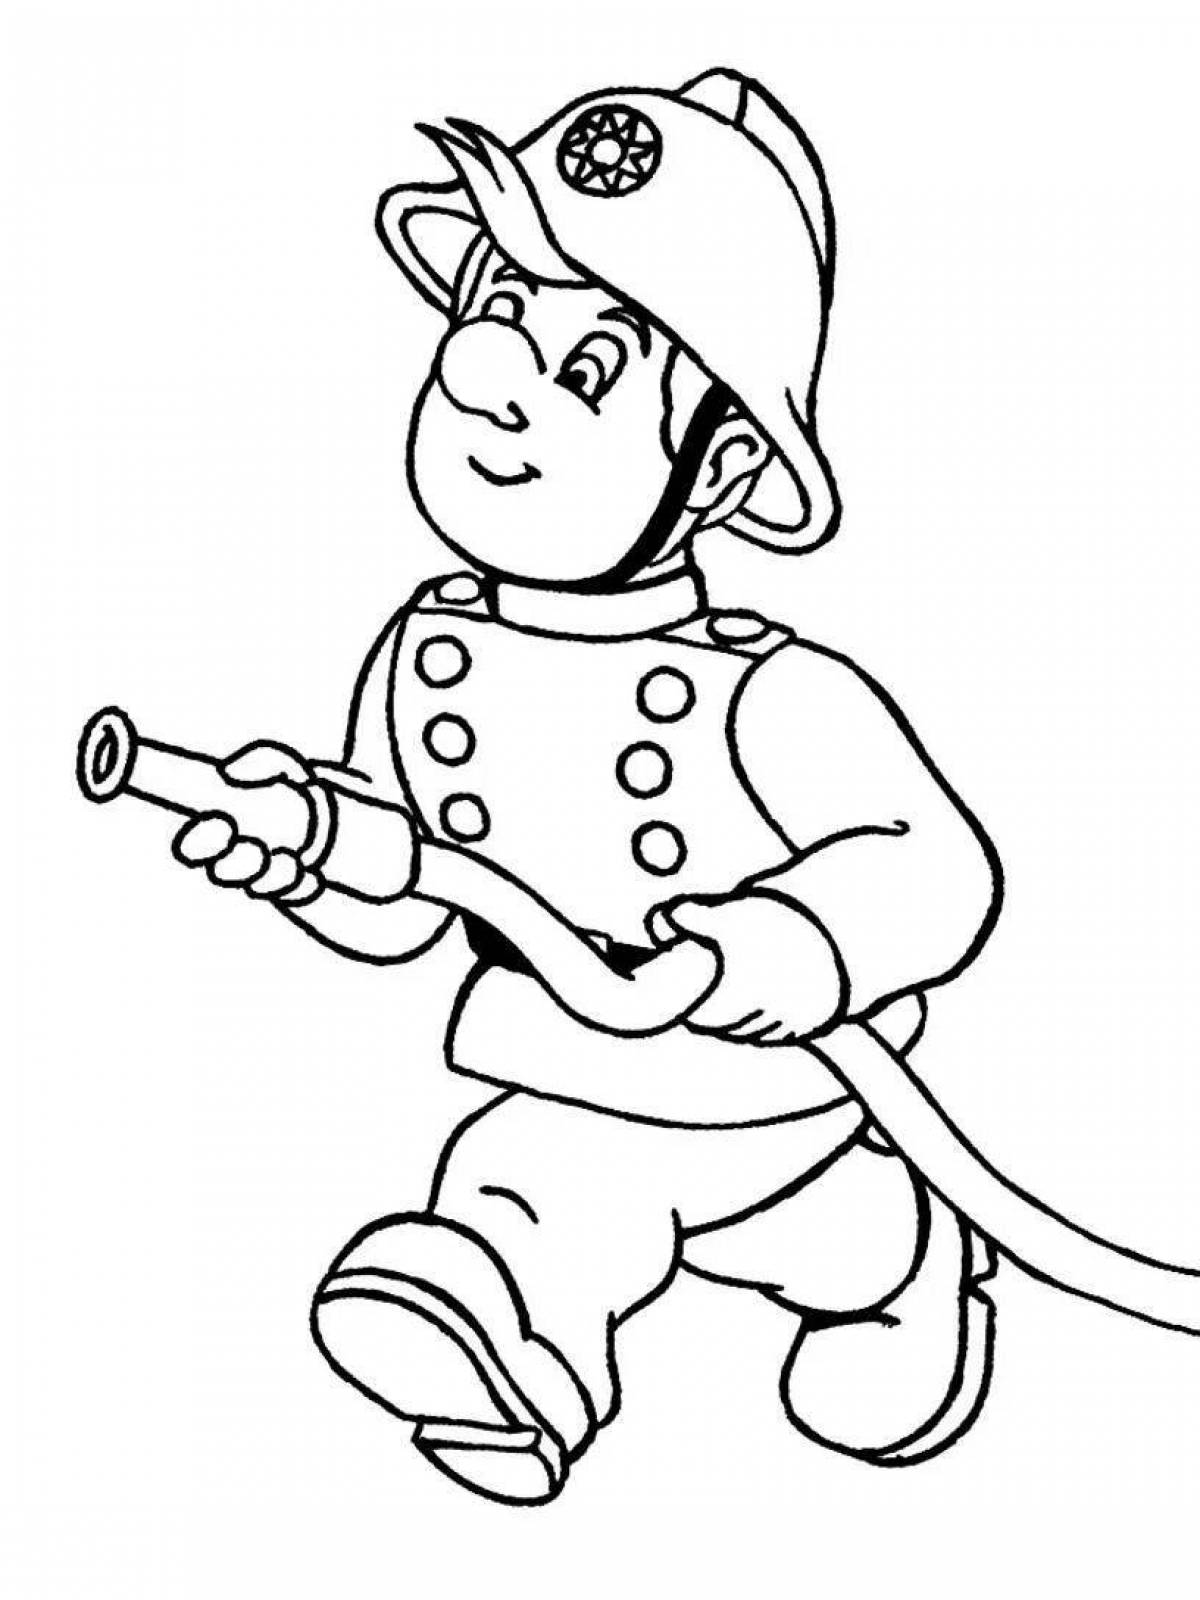 Exciting electrician coloring book